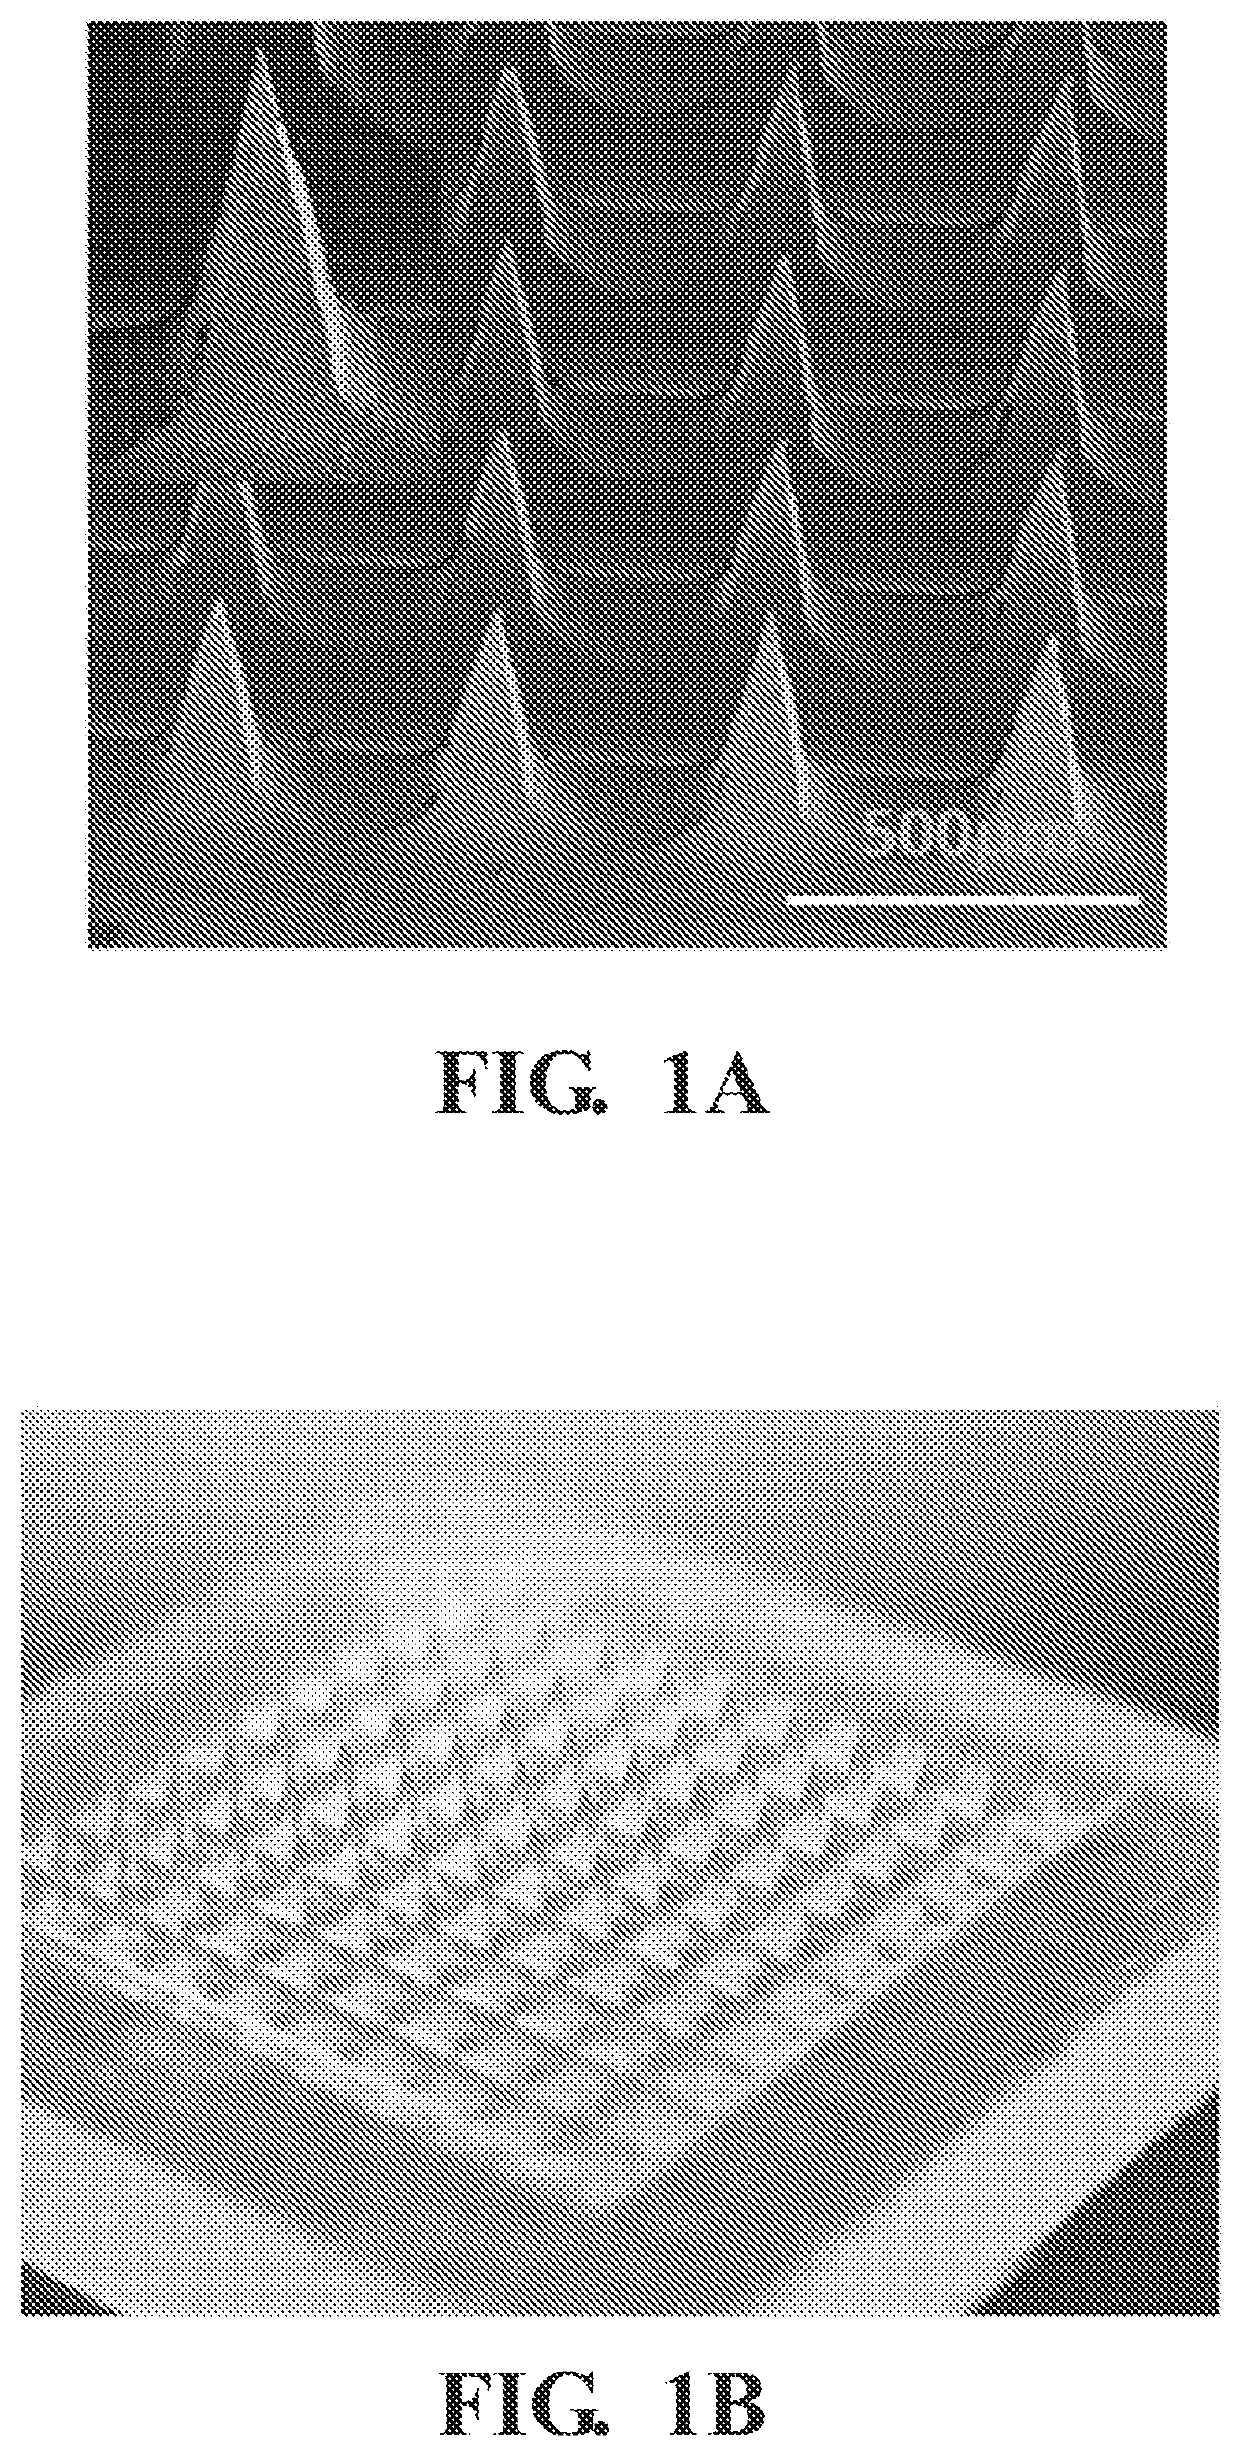 Polymer microneedle mediated drug delivery